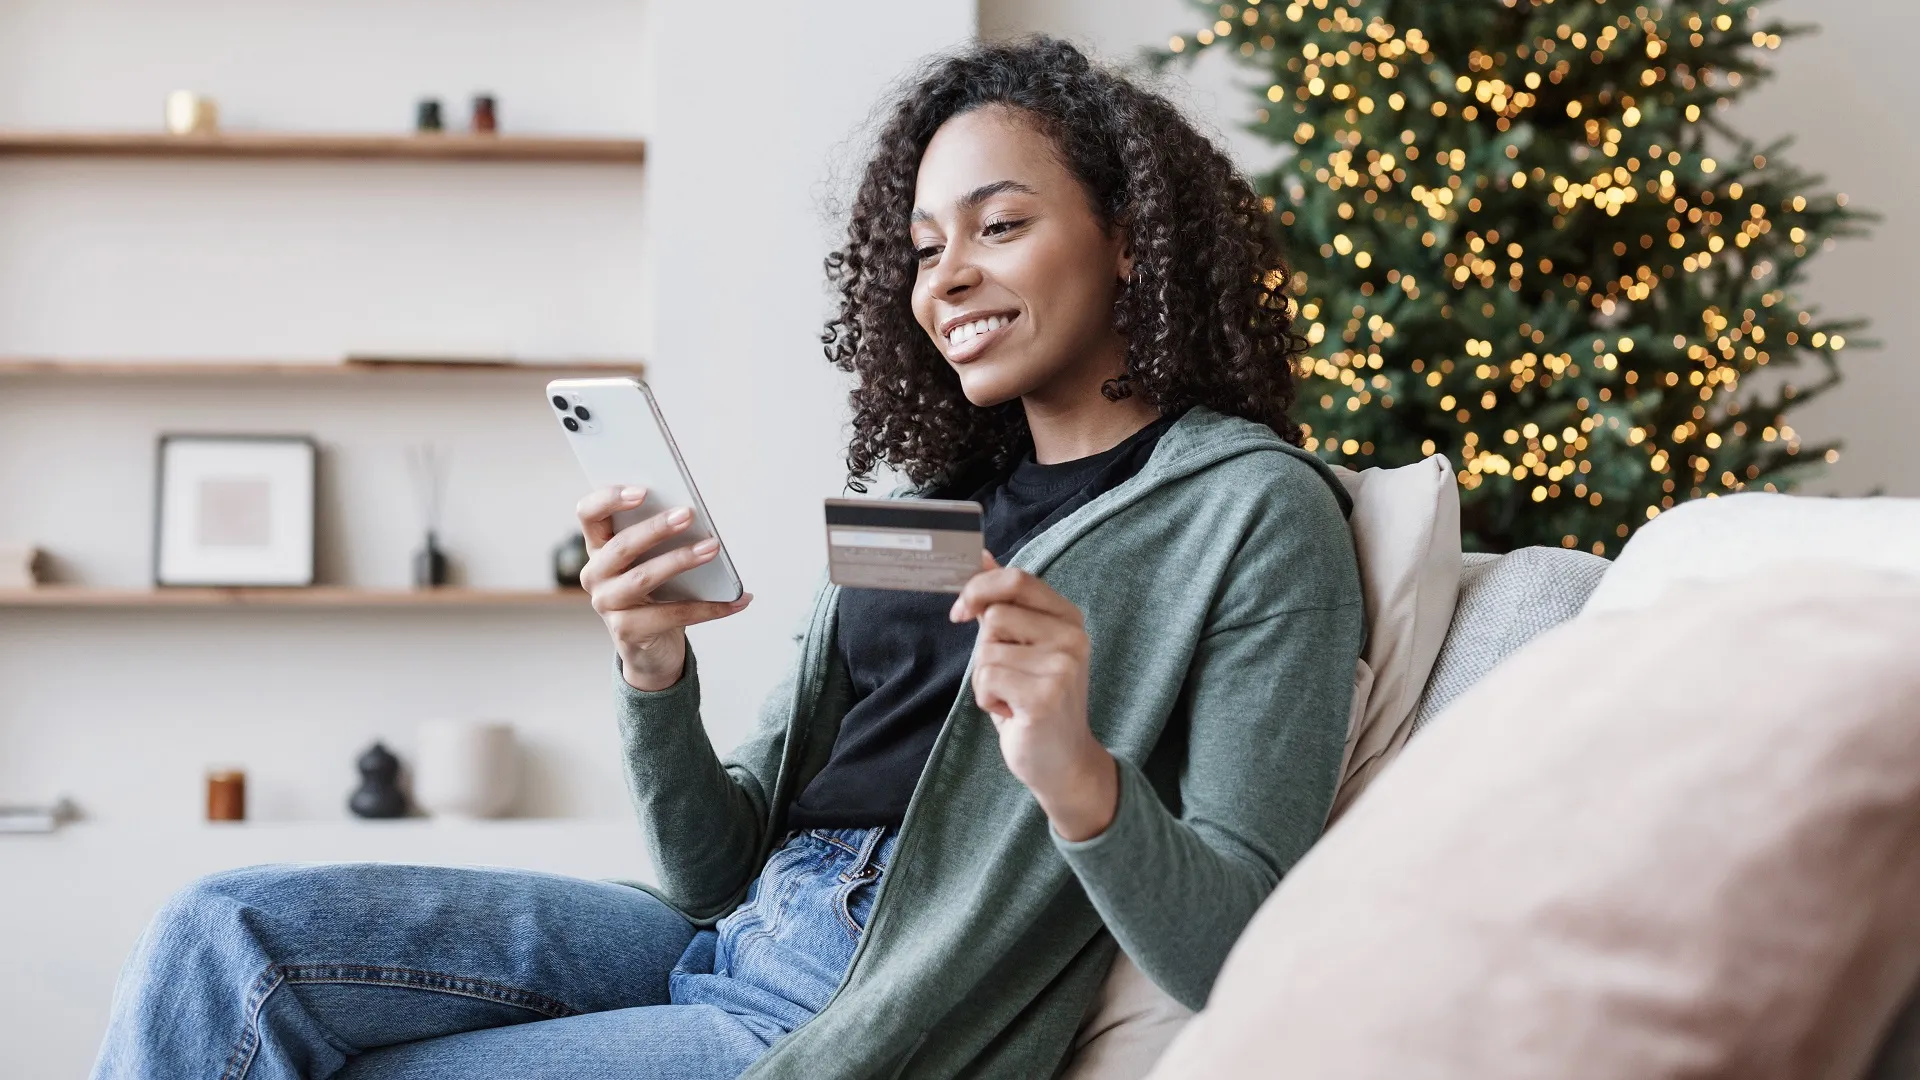 Woman ordering Christmas gifts using smartphone and credit card. Online shopping during holidays stock photo